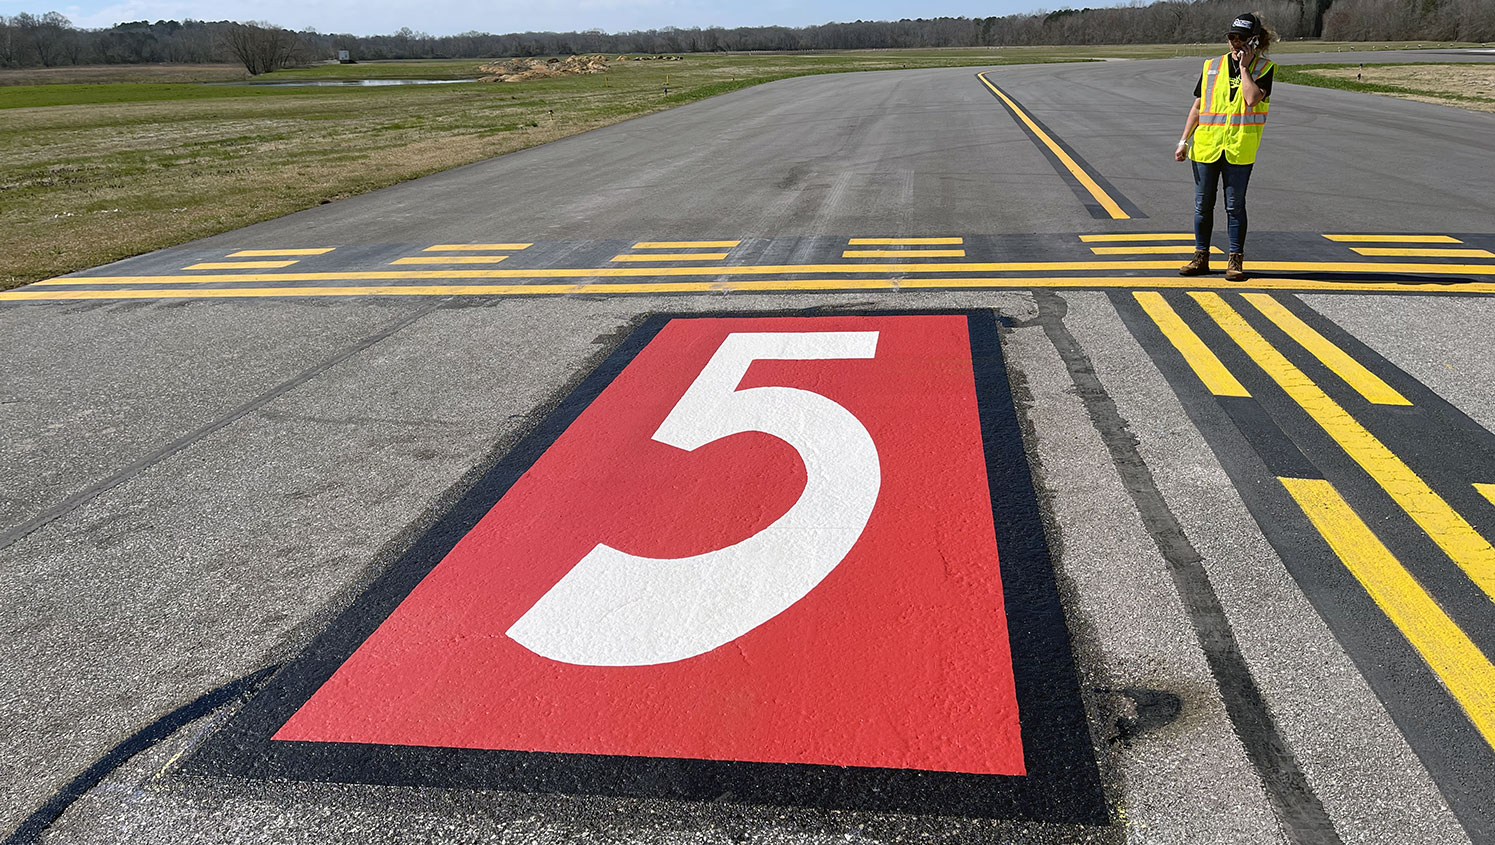 newly striped runway numbering